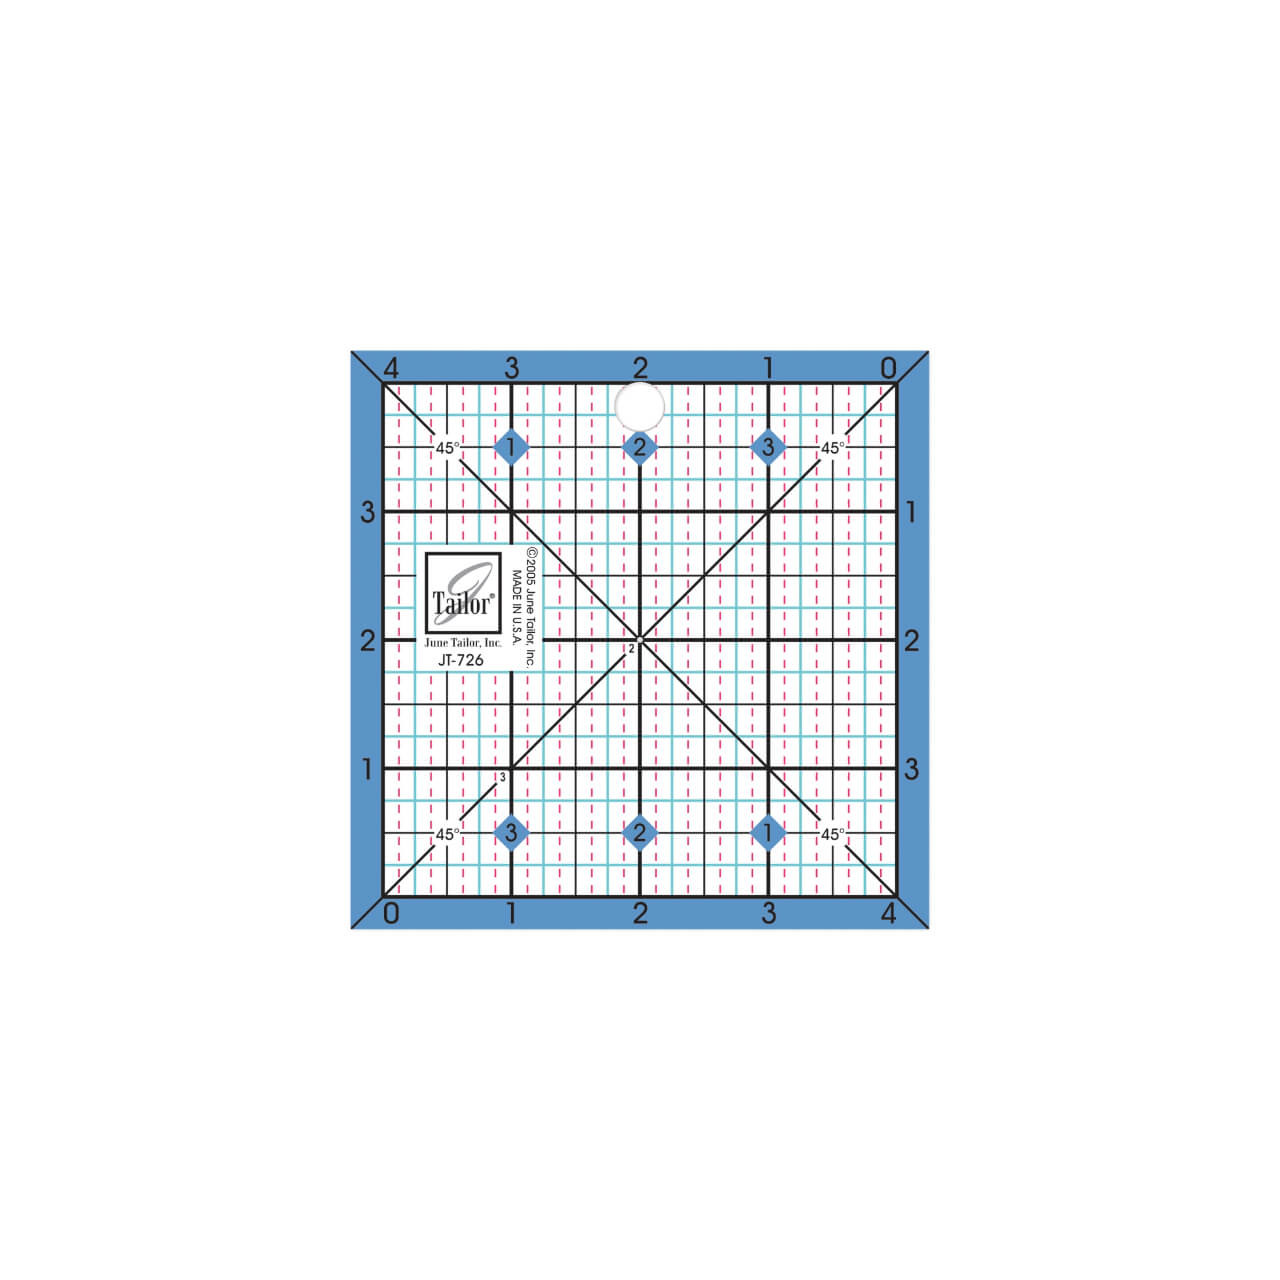 This image shows the June Tailor 4.5" Square Up Ruler, a quilting tool featuring a blue border with red grid lines and markings for precise measurement and cutting of fabrics. The ruler's clear design allows for easy visibility of material underneath, and its compact size is ideal for small-scale projects.